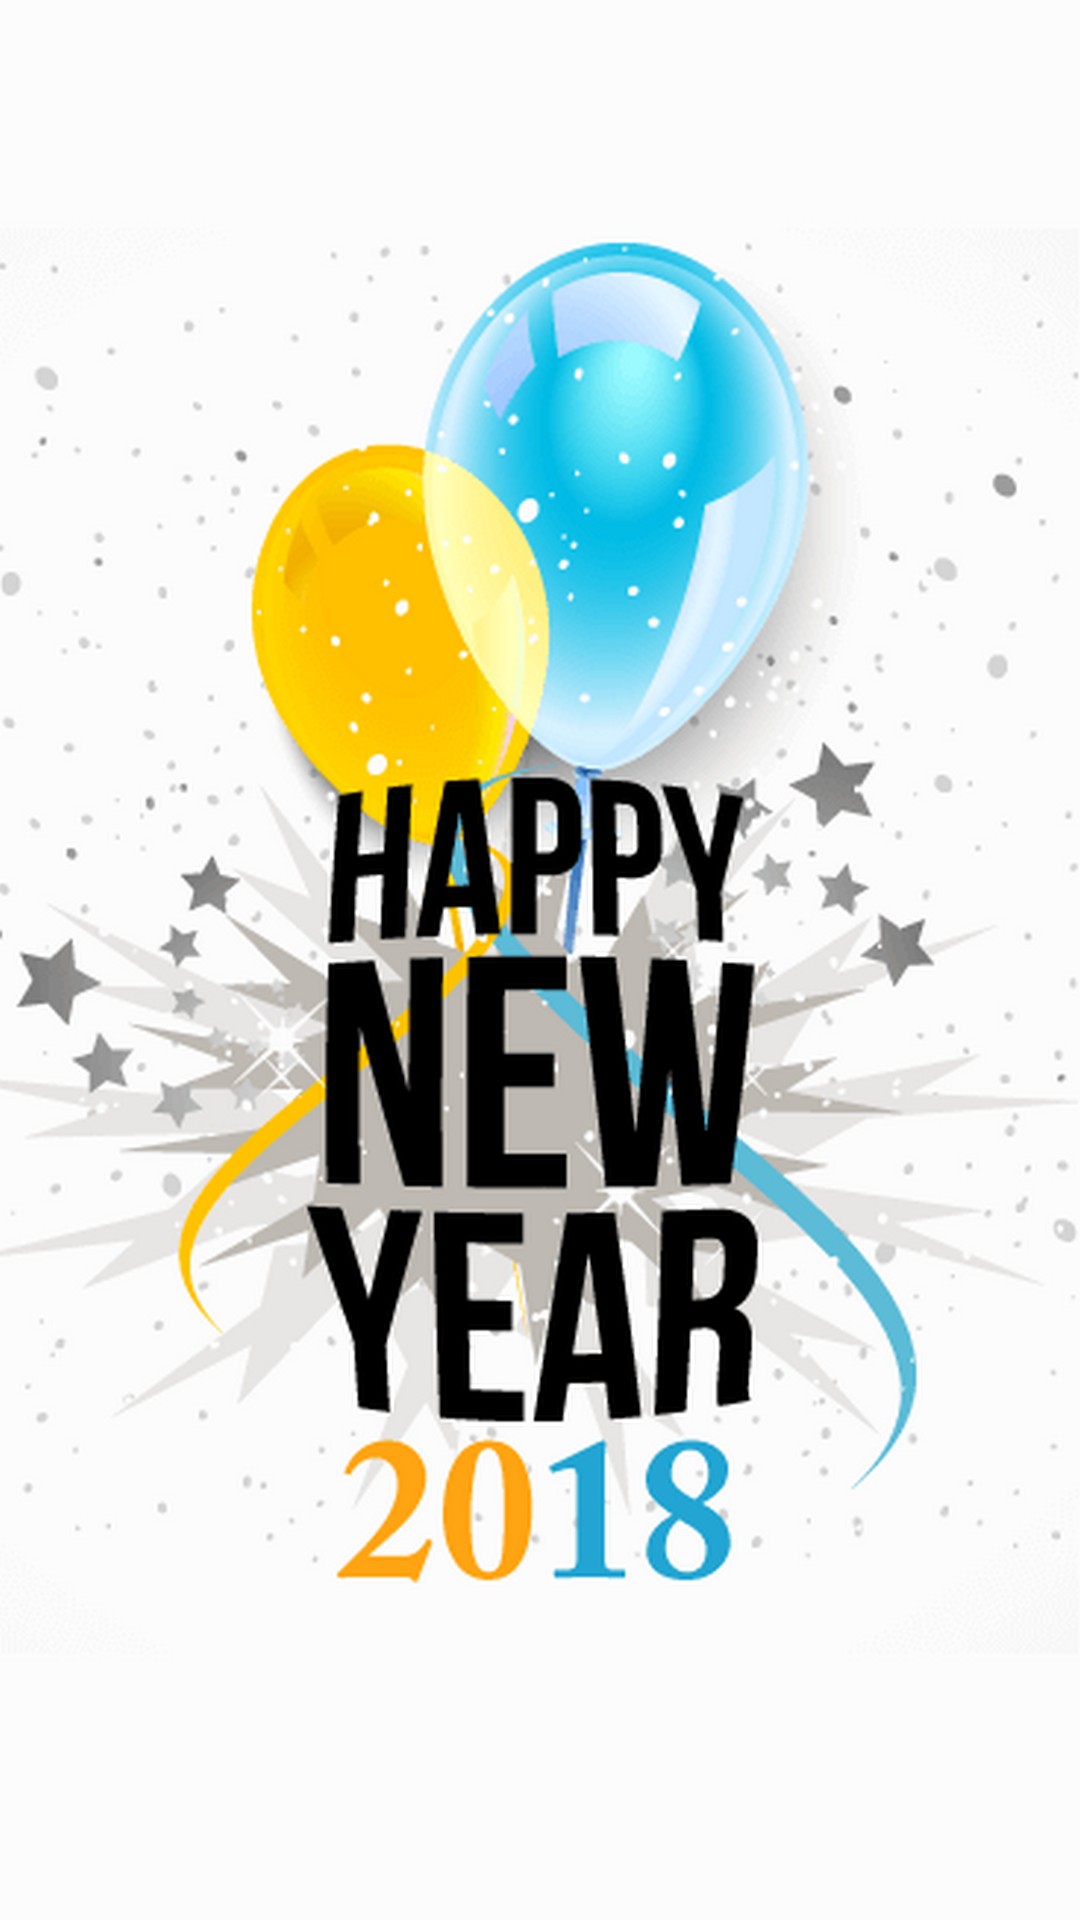 Happy New Year 2018 Iphone Wallpaper - Happy New Year 2018 Wallpaper Iphone - HD Wallpaper 